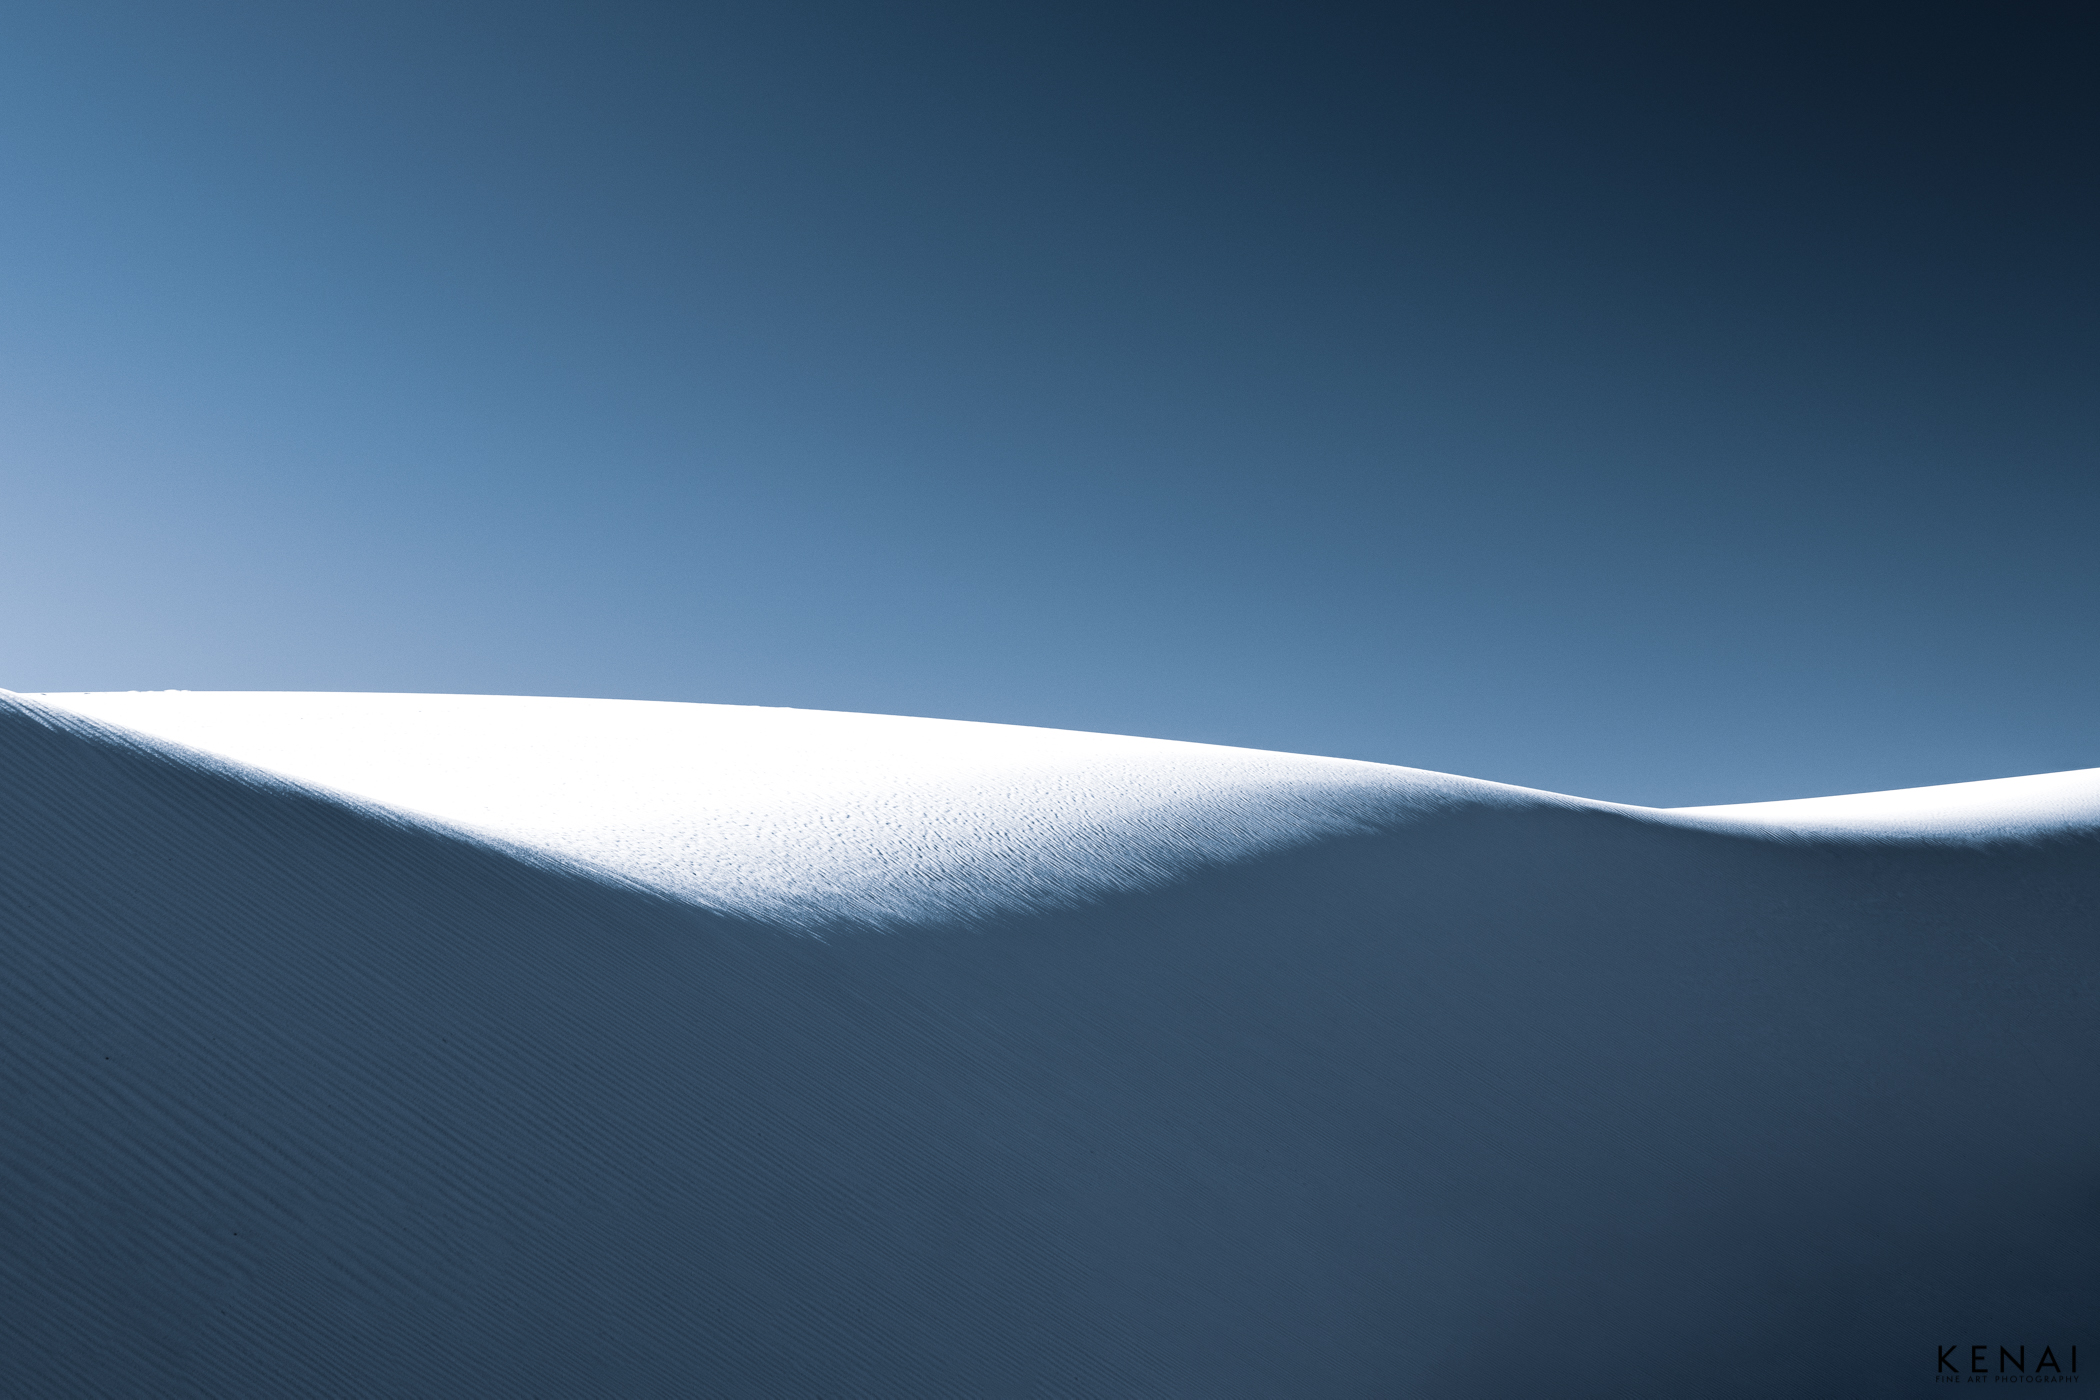 An abstract image of gypsum dunes at White Sands National Park, New Mexico